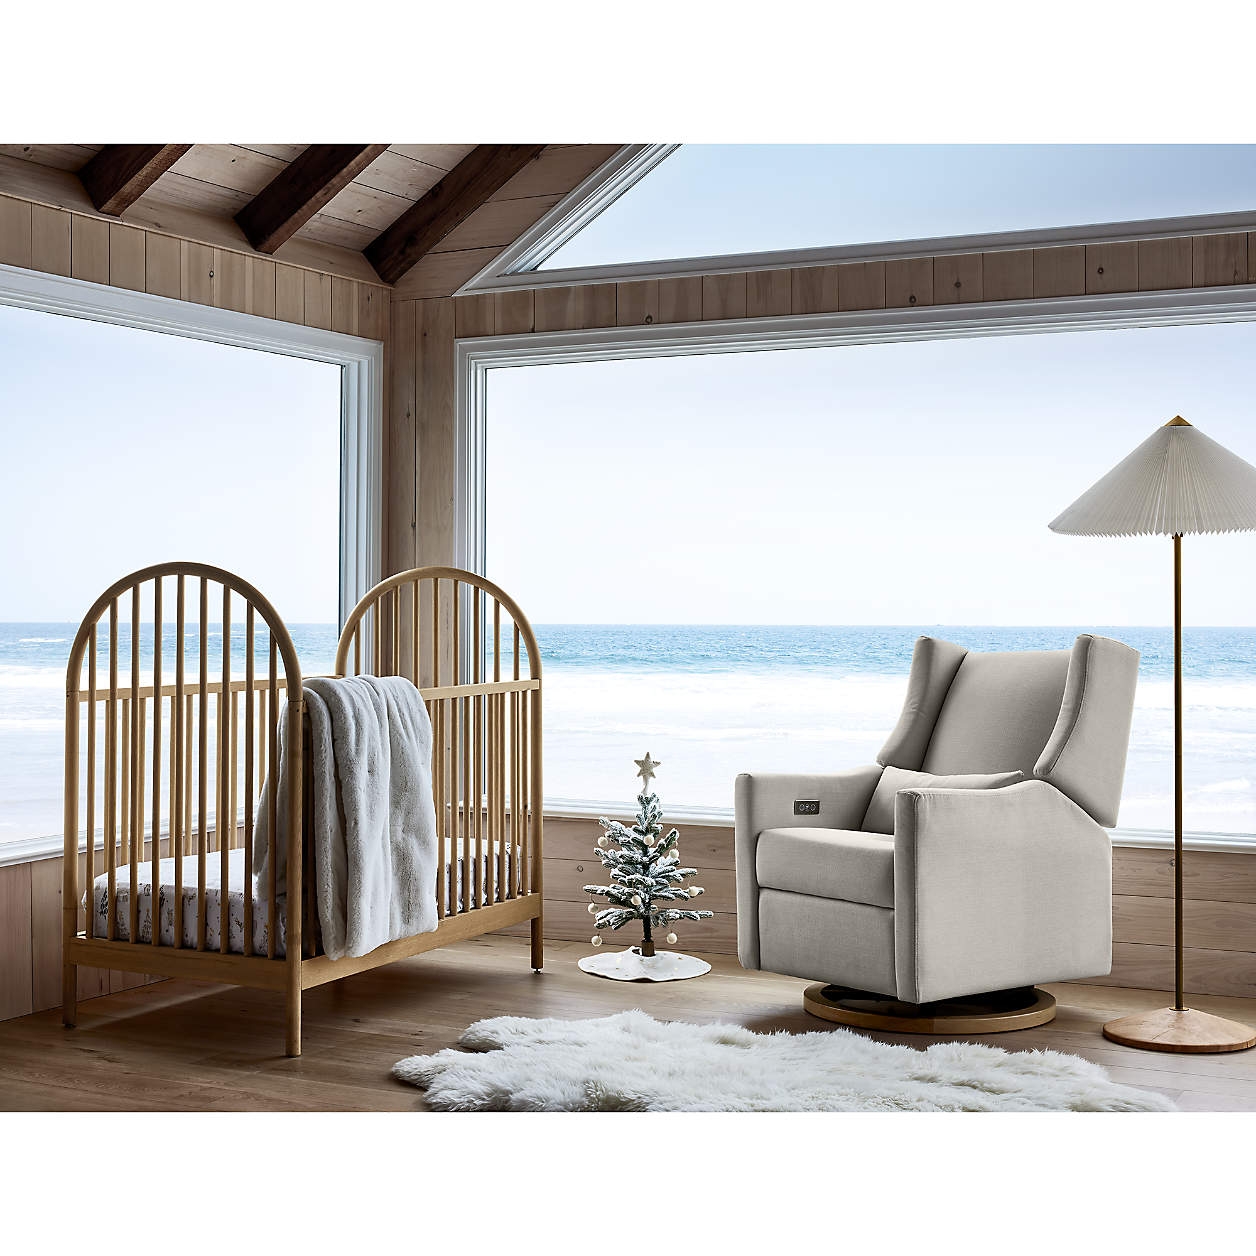 Canyon Natural Spindle Wood Convertible Baby Crib by Leanne Ford - Image 14